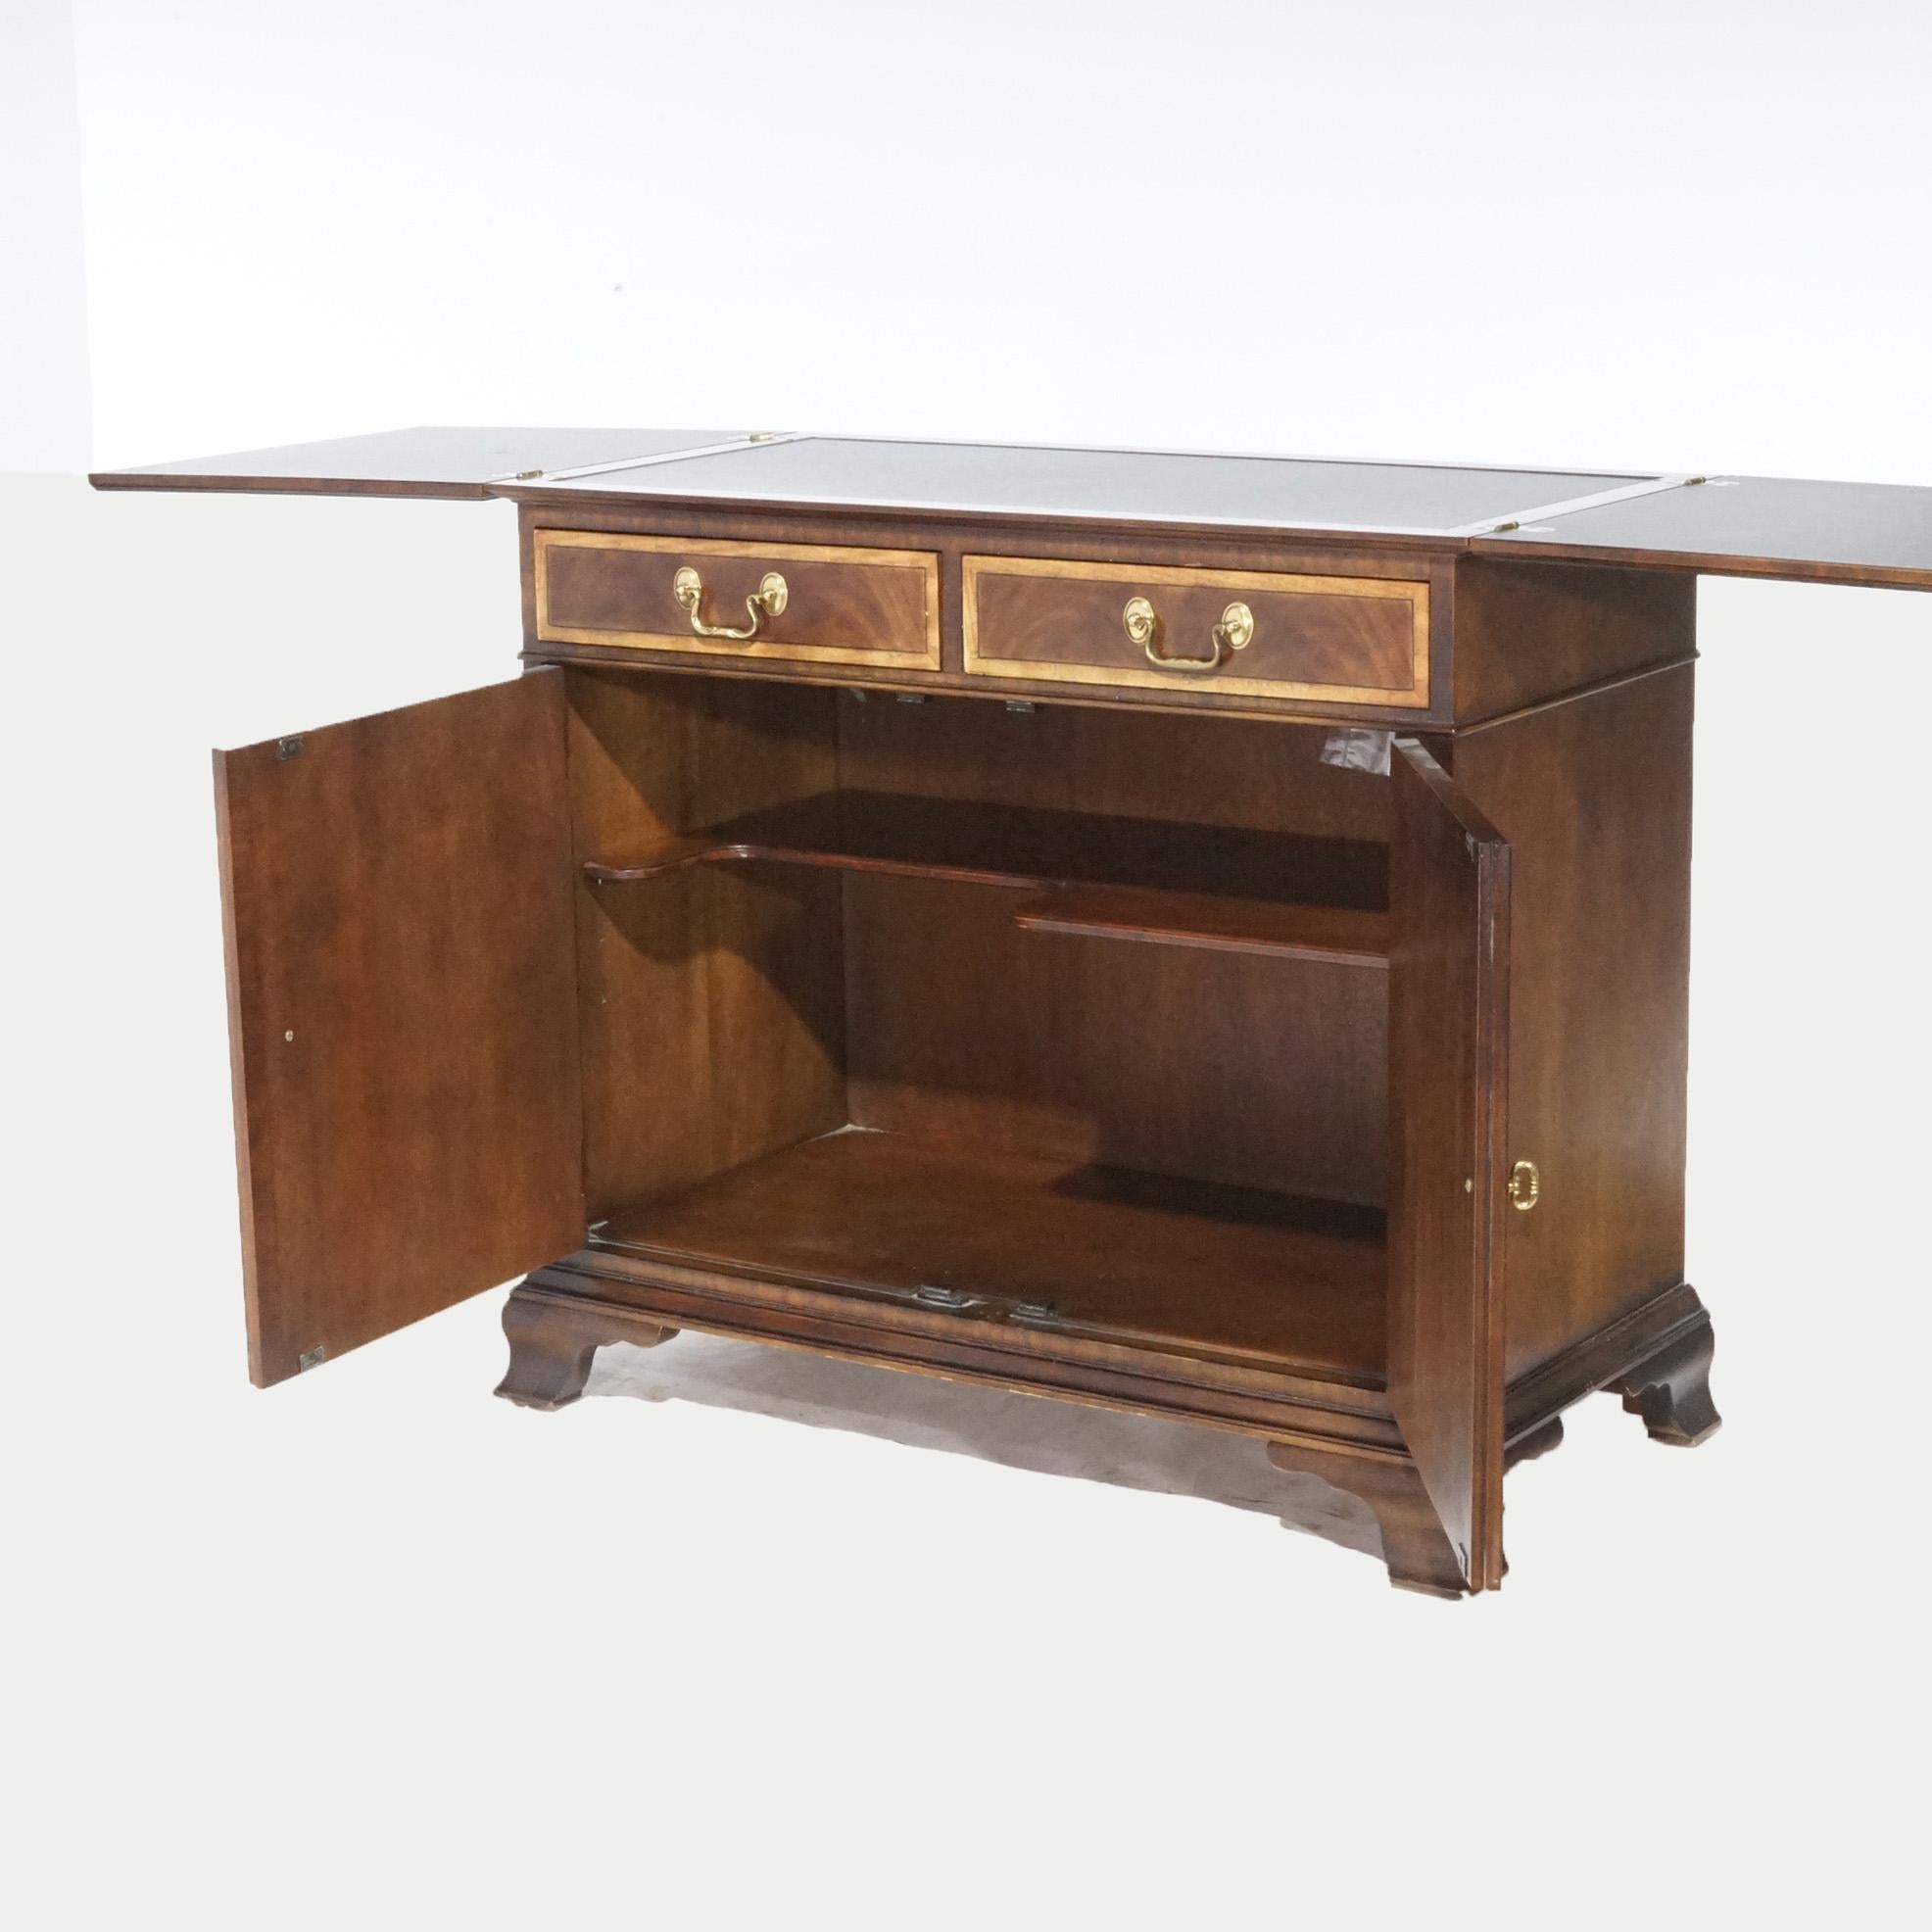 American Regency Style Mahogany Inlaid & Banded Credenza Server by Henredon, 20th Century For Sale